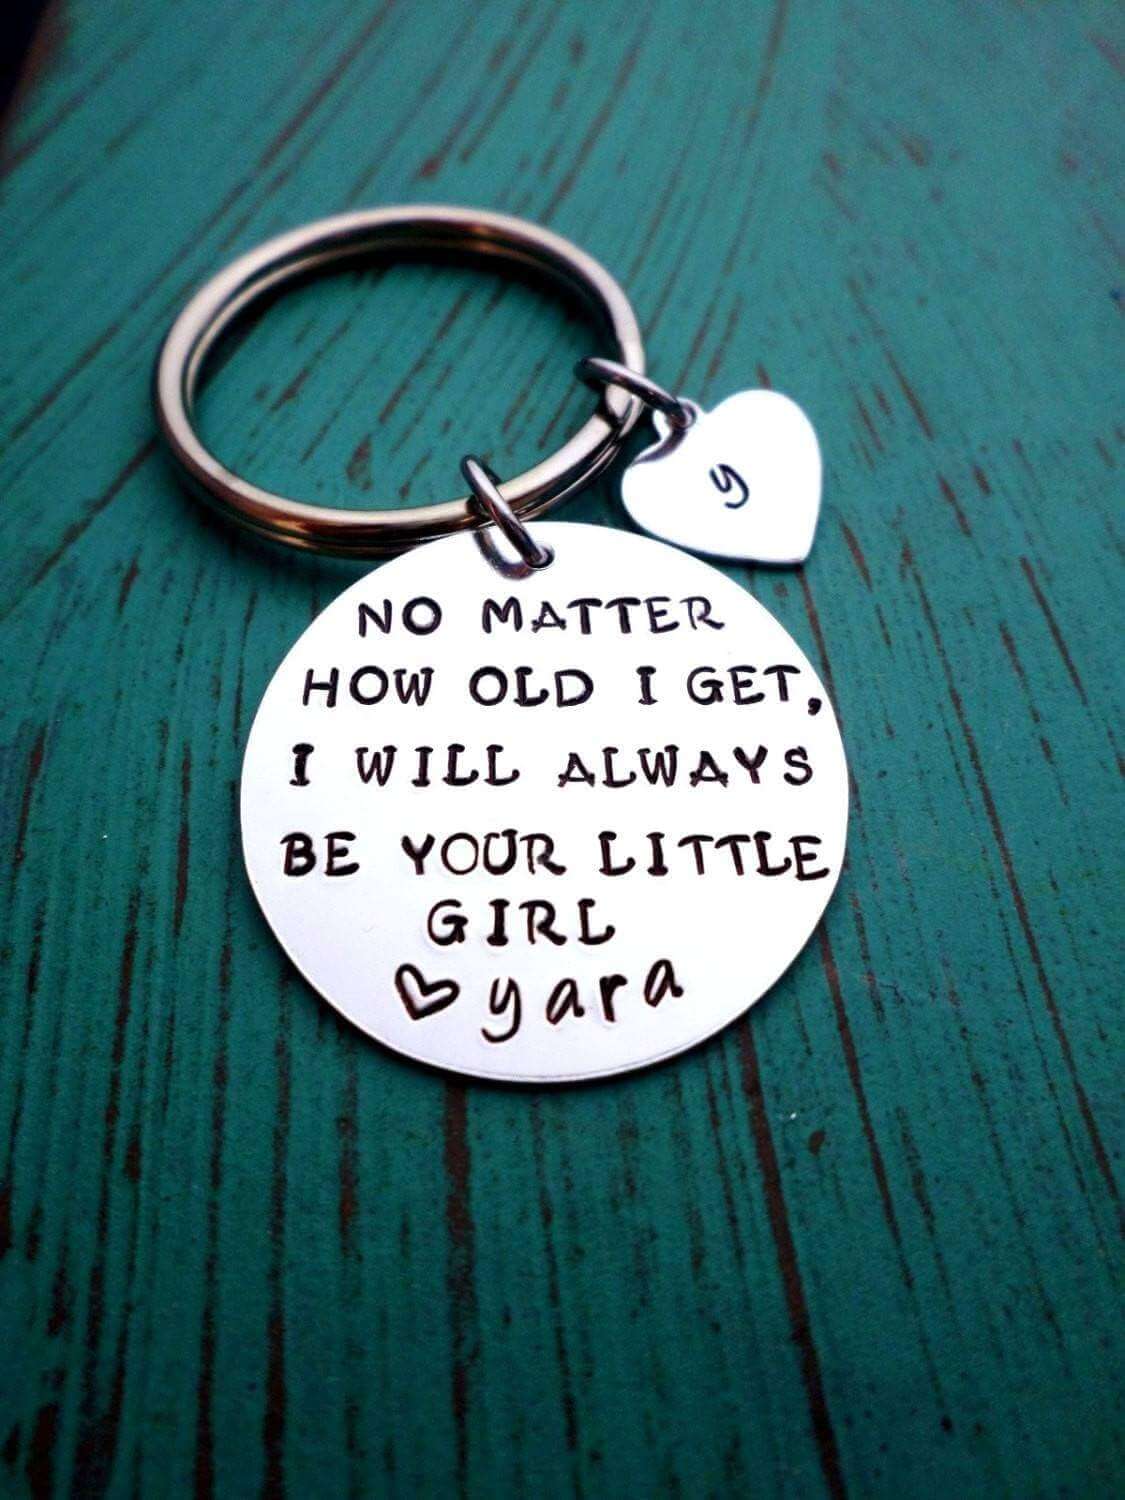 No Matter how old I get, Father's Keychain, Daughter Gift, Mom and Dad, Christmas Gift, Gift for Dad, Gift for Grandpa, Custom Gift, Dad Gift, Keychains, HandmadeLoveStories, HandmadeLoveStories , [Handmade_Love_Stories], [Hand_Stamped_Jewelry], [Etsy_Stamped_Jewelry], [Etsy_Jewelry]